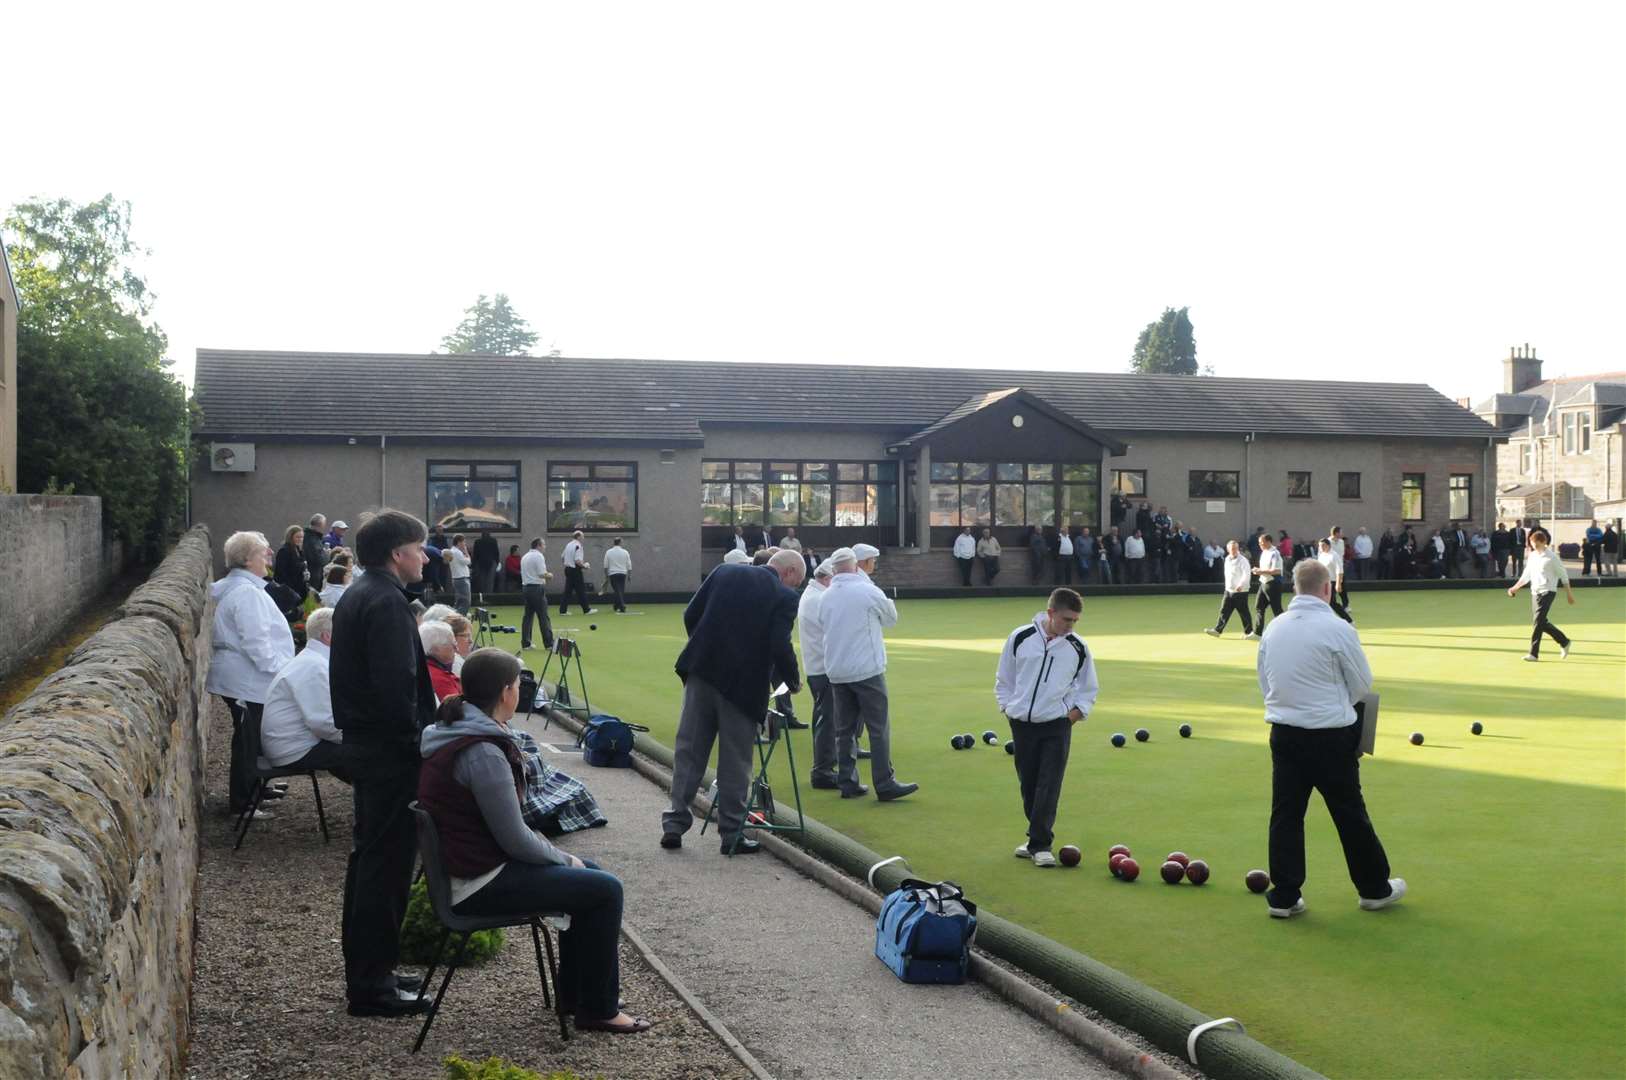 Moray Bowling Club hosted the British Isles under-25 international in 2016, but the event has been cancelled for the second year running.